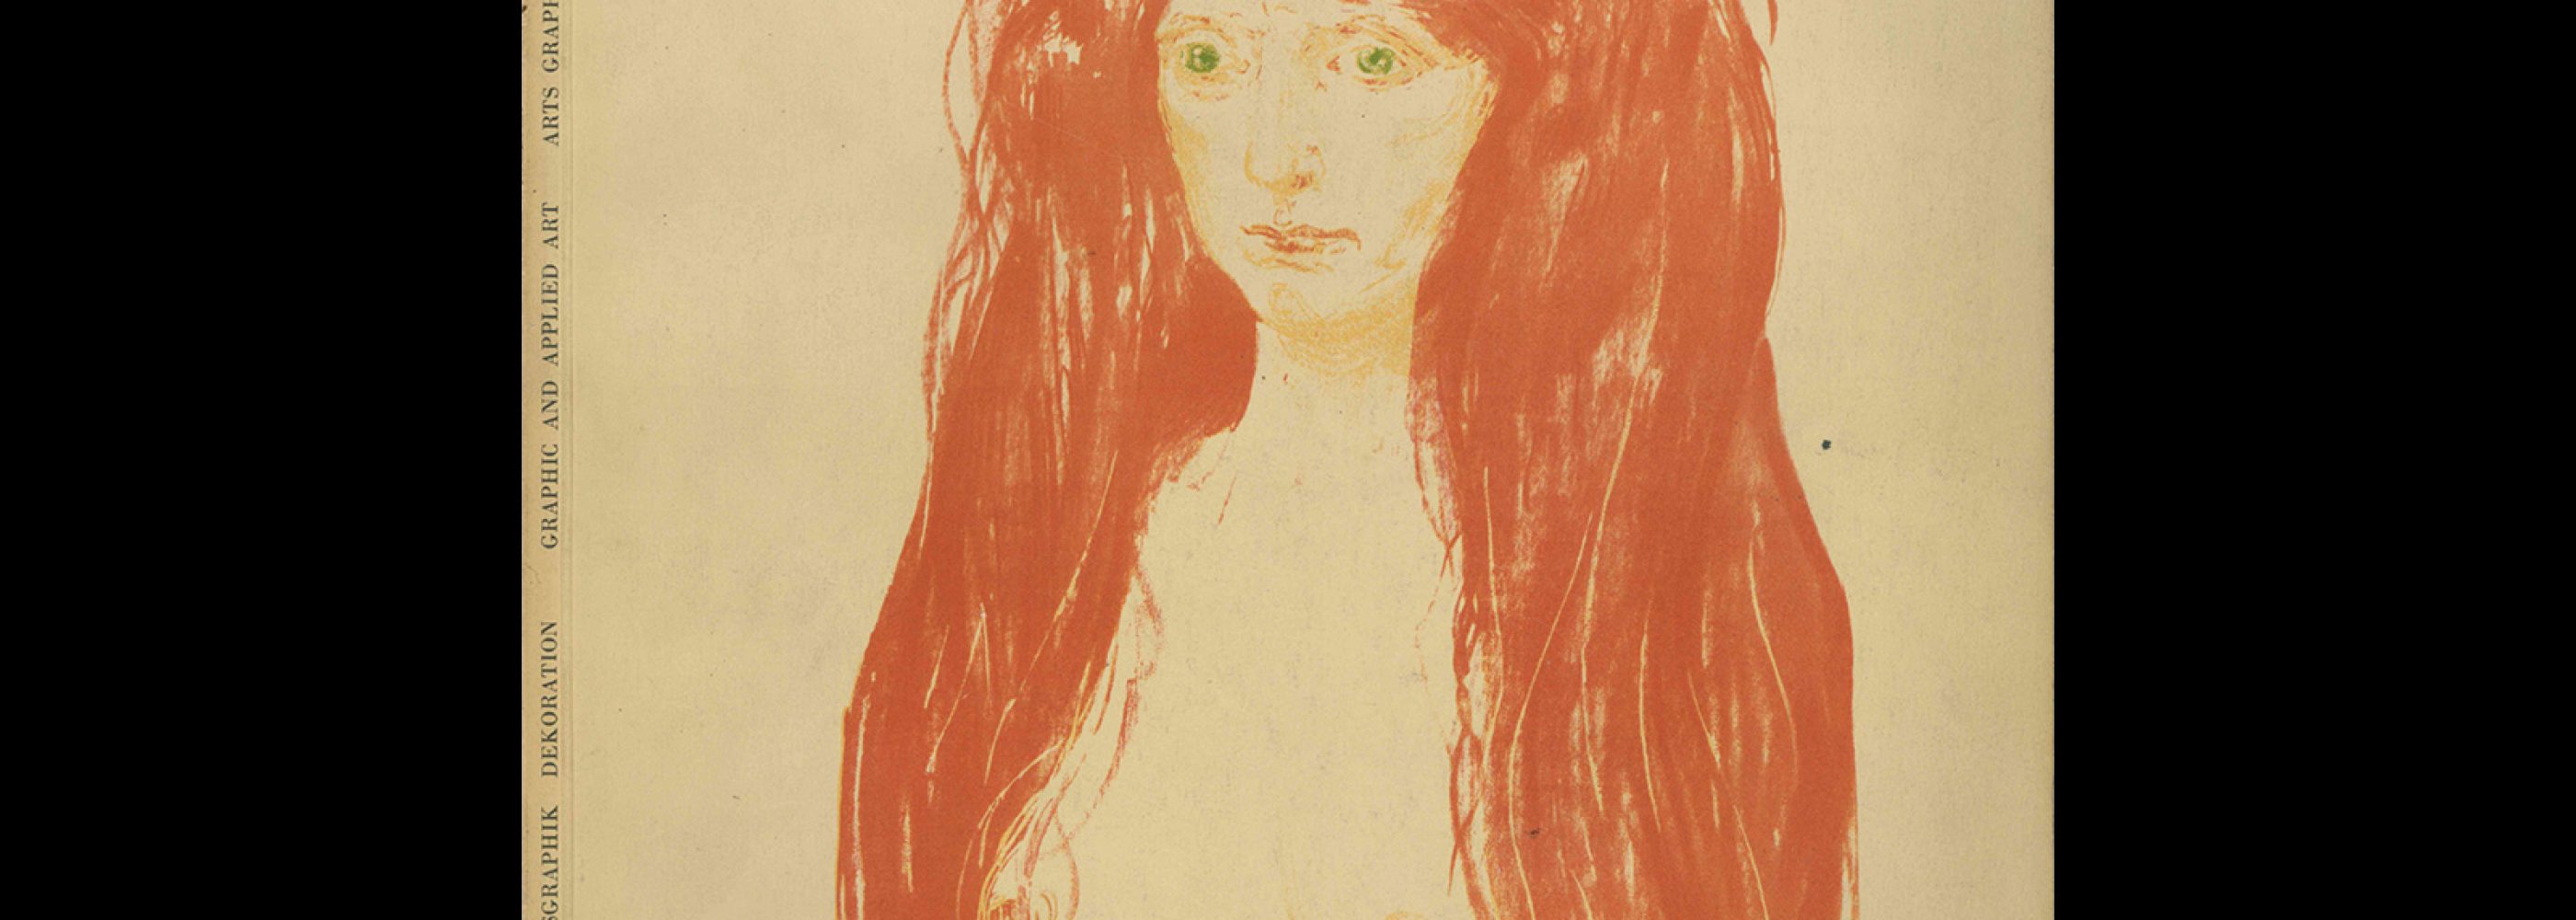 Graphis 05-06, 1945. Cover design by Edvard Munch